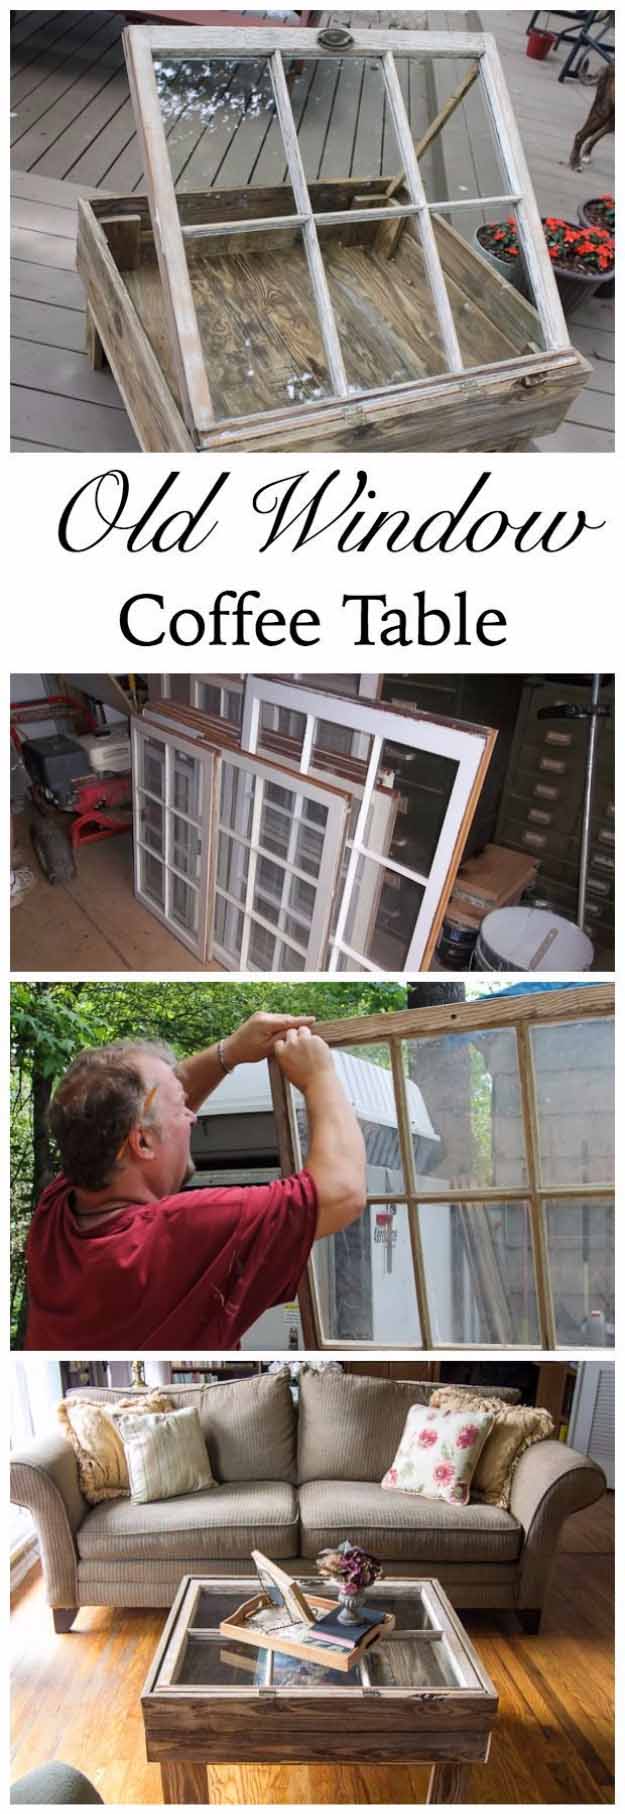 Easy DIY Furniture Ideas | Upcycling Projects with Old Windows | DIY Rustic Coffee Table Ideas | DIY Projects and Crafts by DIY JOY #coffeetables #diyfurniture